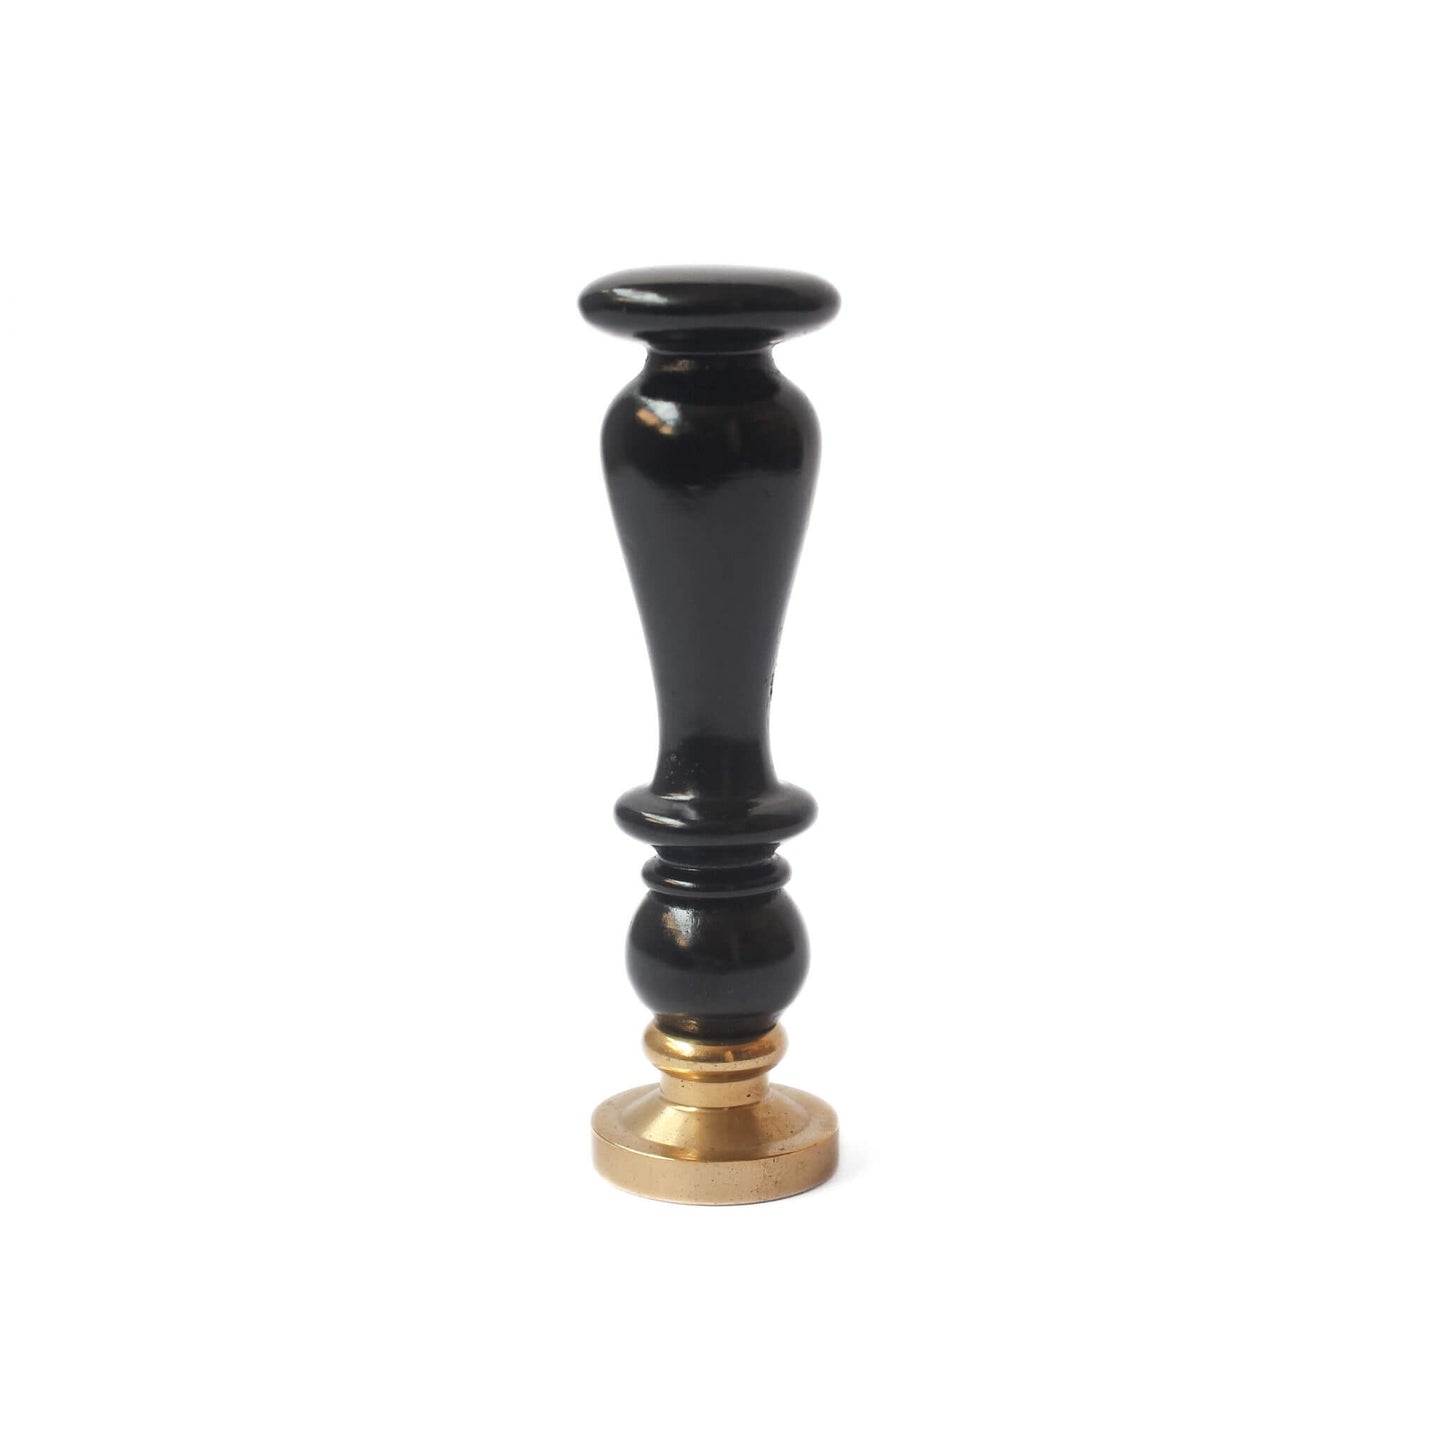 side view of florentine wax seal with black vintage wooden handle